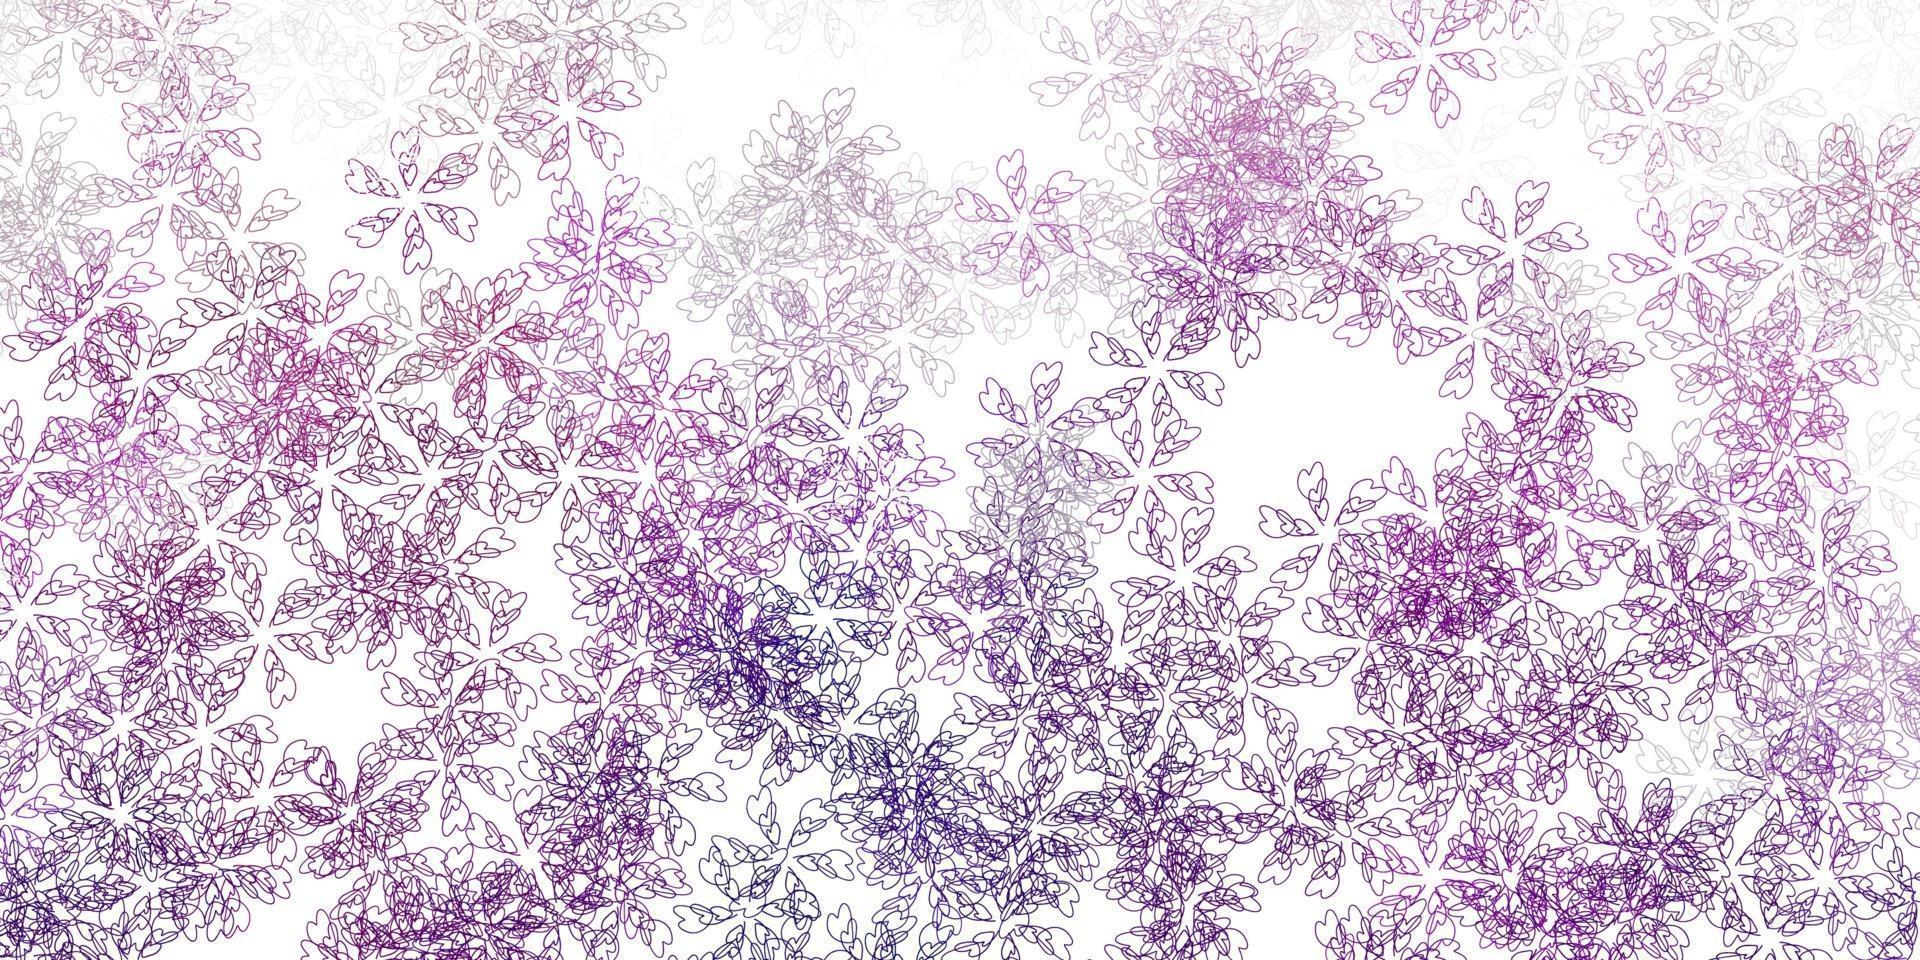 Light pink vector abstract artwork with leaves.